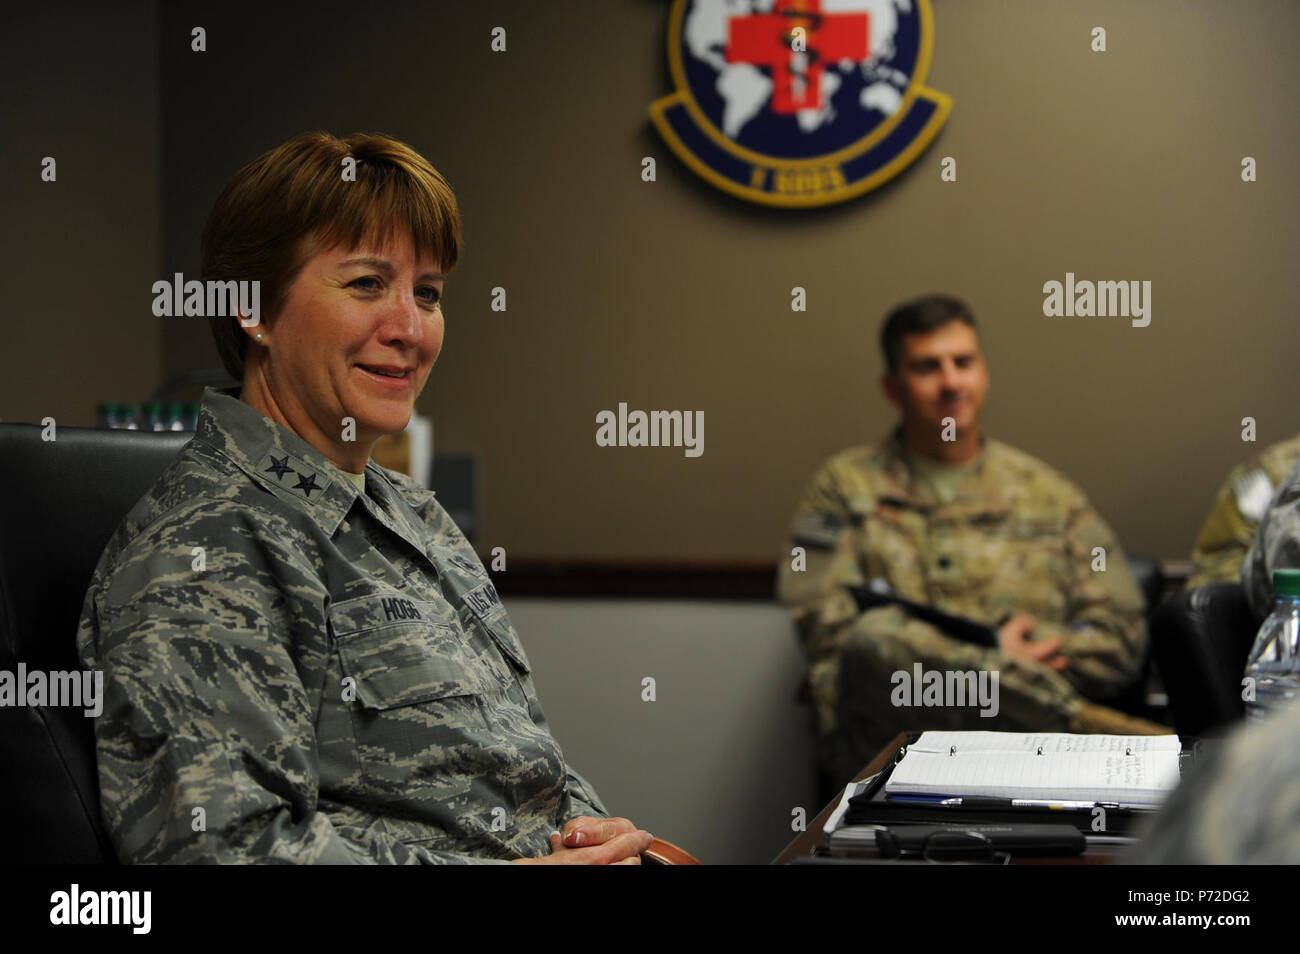 Maj. Gen. Dorothy Hogg, Deputy Surgeon General and Chief of the Air Force Nurse Corps with the Office of the Surgeon General, Headquarters U.S. Air Force, receives a mission capabilities briefing at Hurlburt Field, Fla., May 11, 2017. Gen. Hogg visited the 1st SOMDG in order to get a hands-on understanding of the mission, accomplishments and future of the organization. Stock Photo